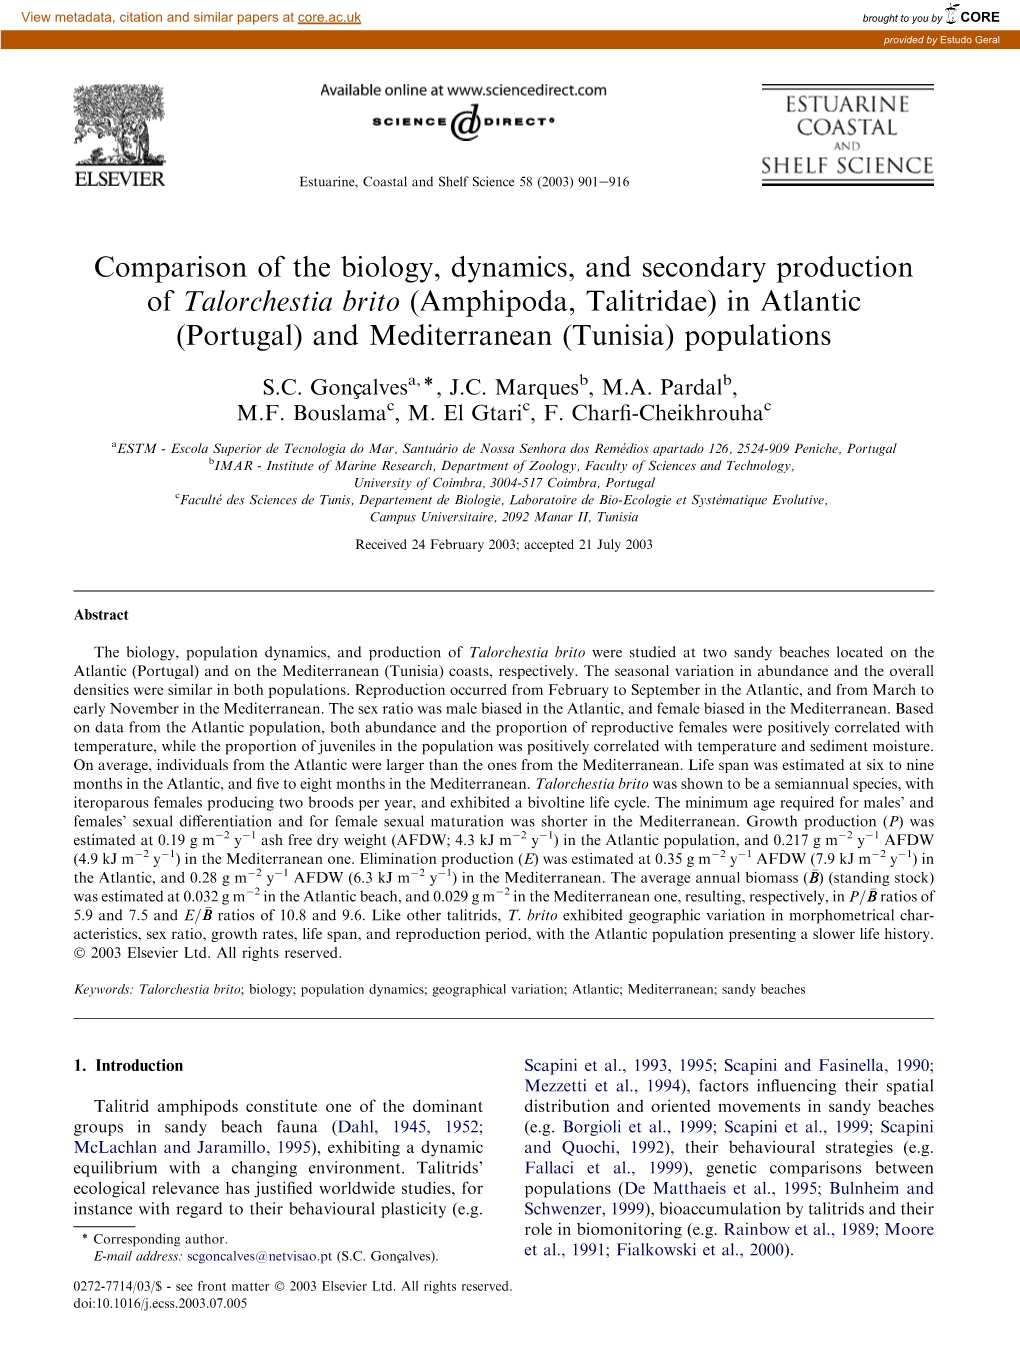 Comparison of the Biology, Dynamics, and Secondary Production Of